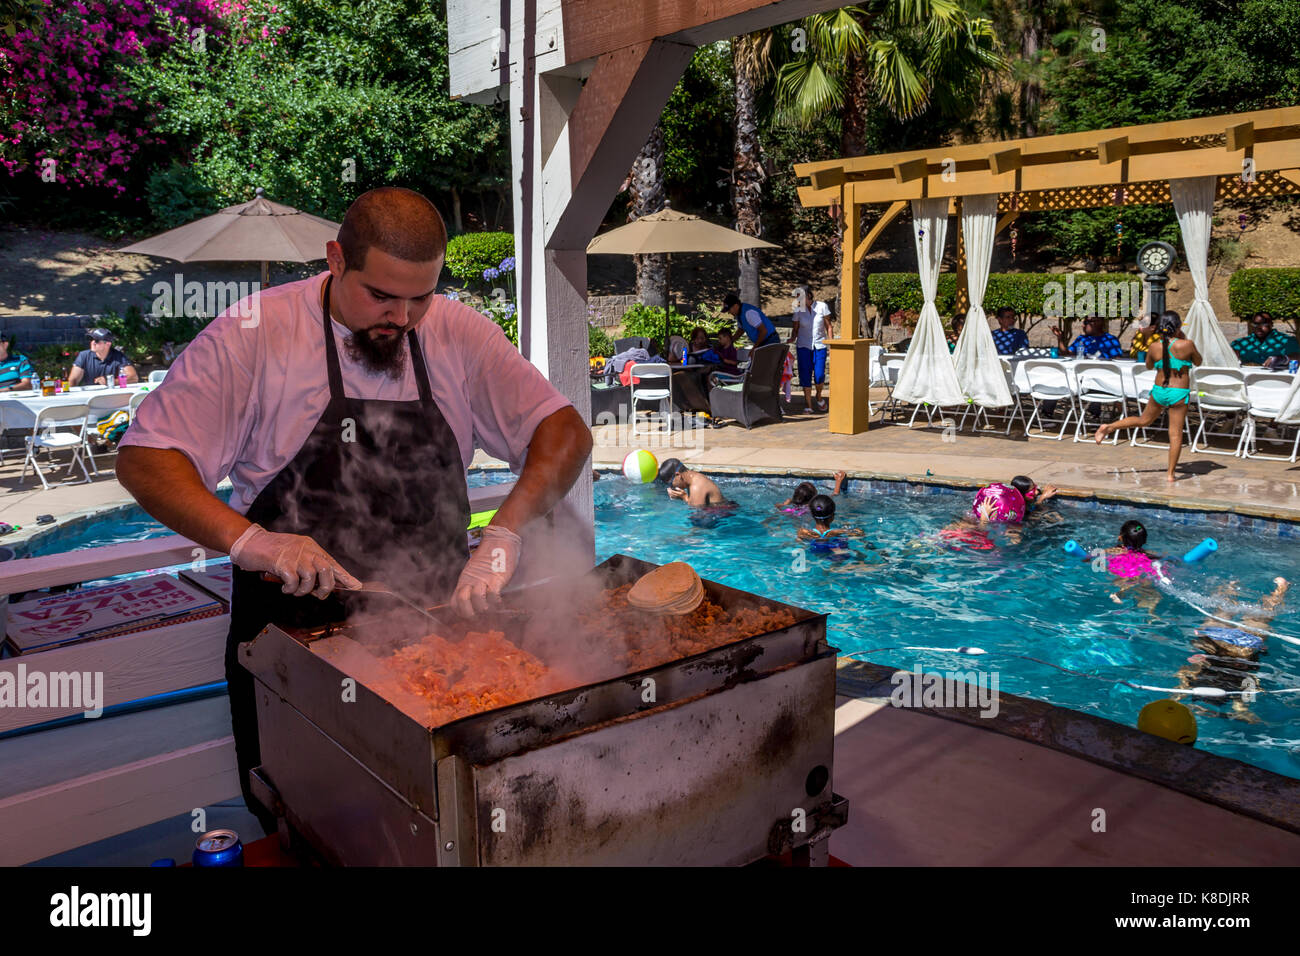 Hispanic man, cook, cooking on flat top grill, grilling meat, grilling meats, griddle, pool party, Castro Valley, Alameda County, California Stock Photo